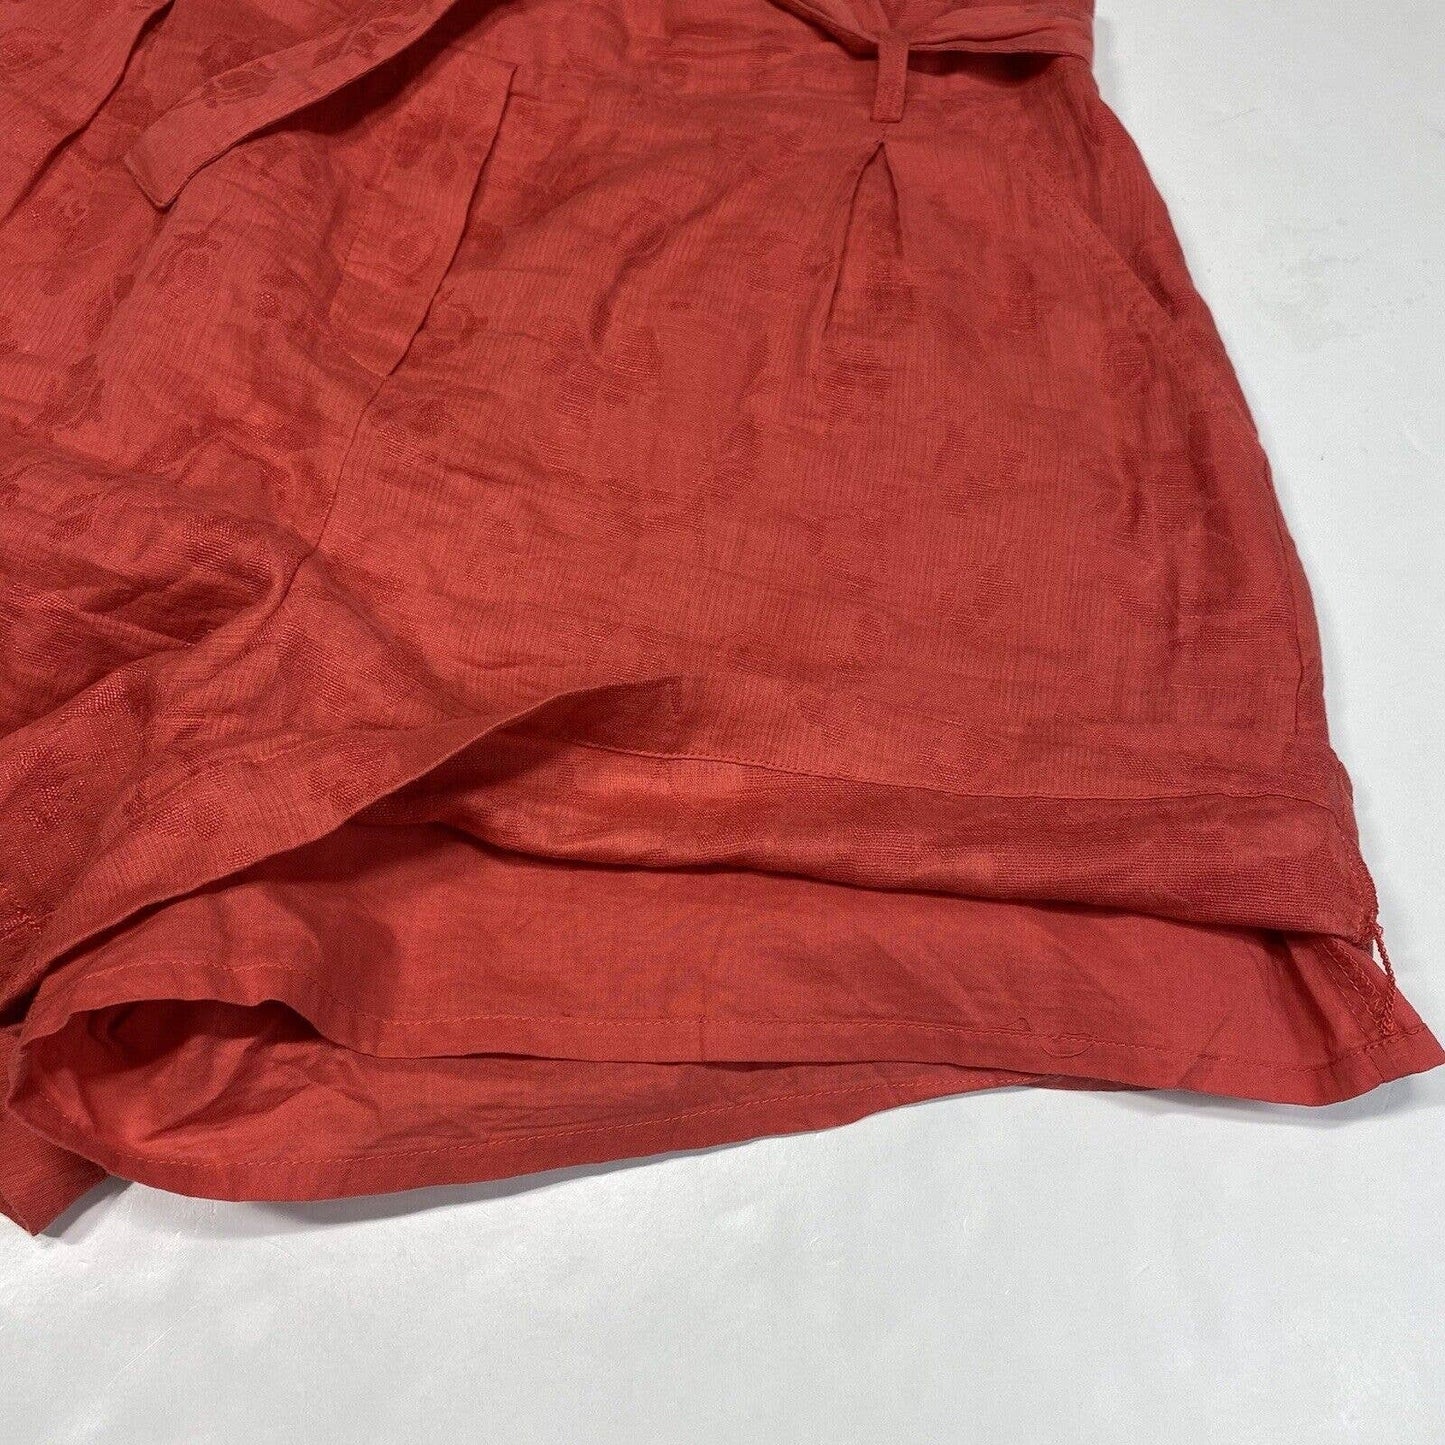 A Loves A High Waist Belted Paperbag Shorts Sz 10 Red Linen/Cotton Pull On Short